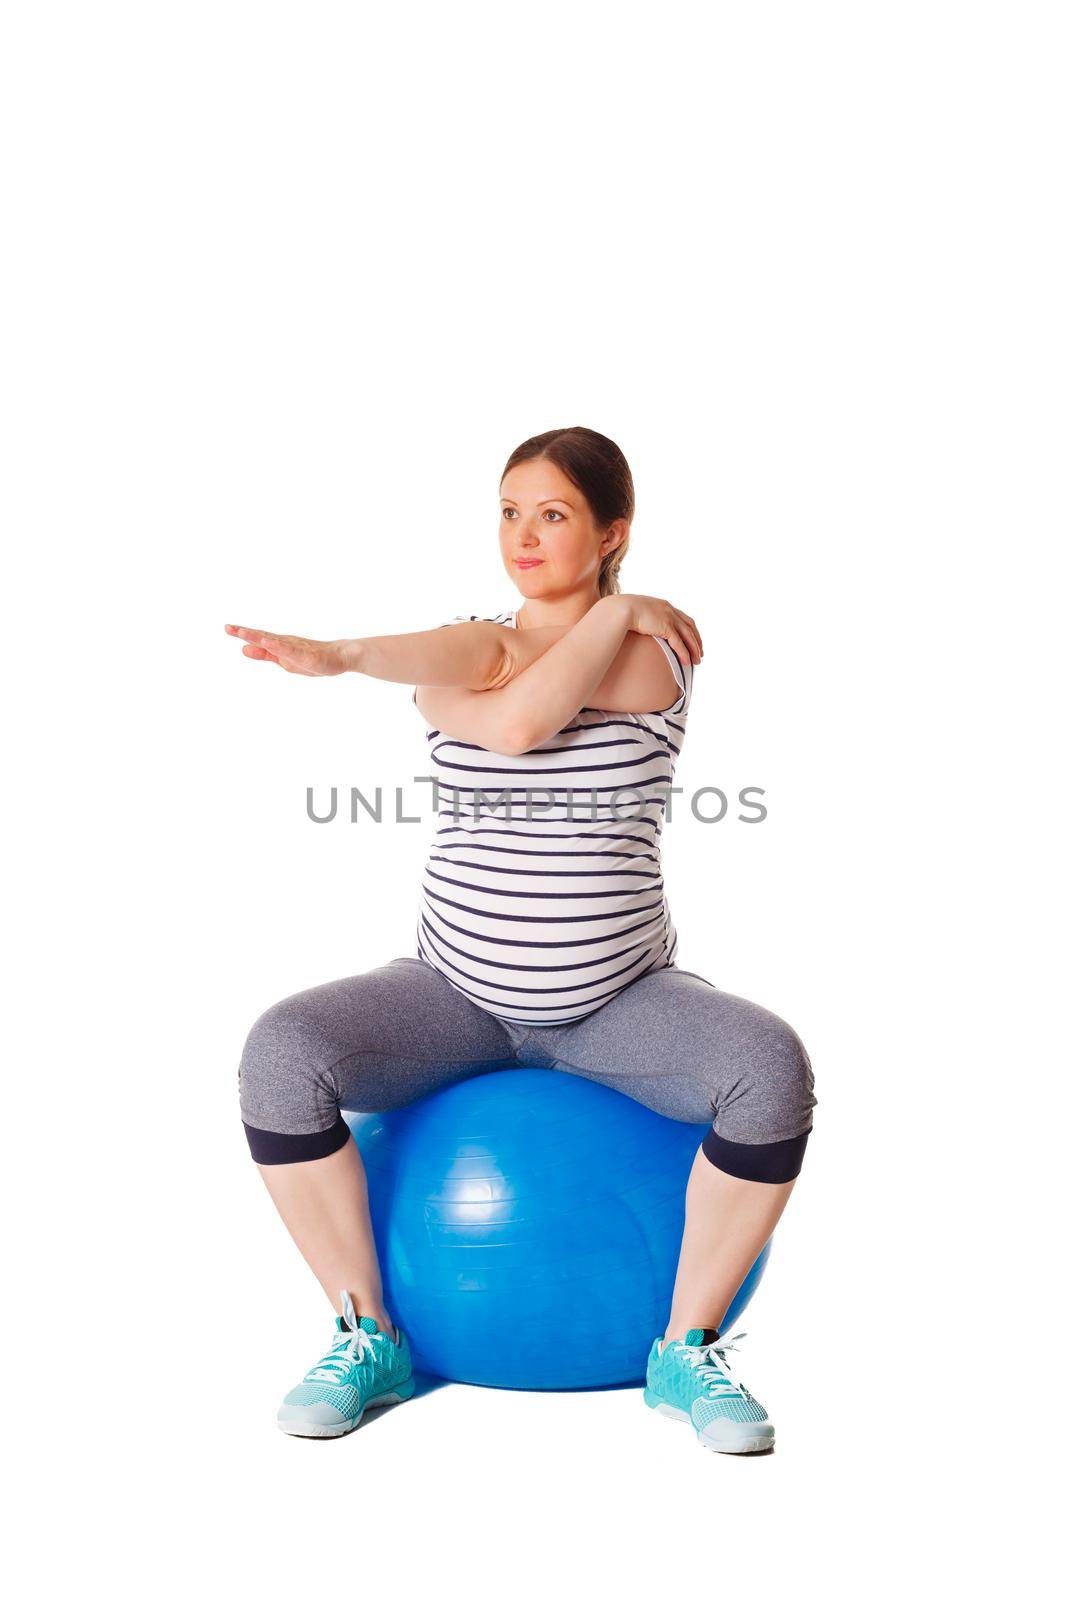 Pregnancy exercise concept - pregnant woman doing stretching exercises with exercise ball isolated on white background